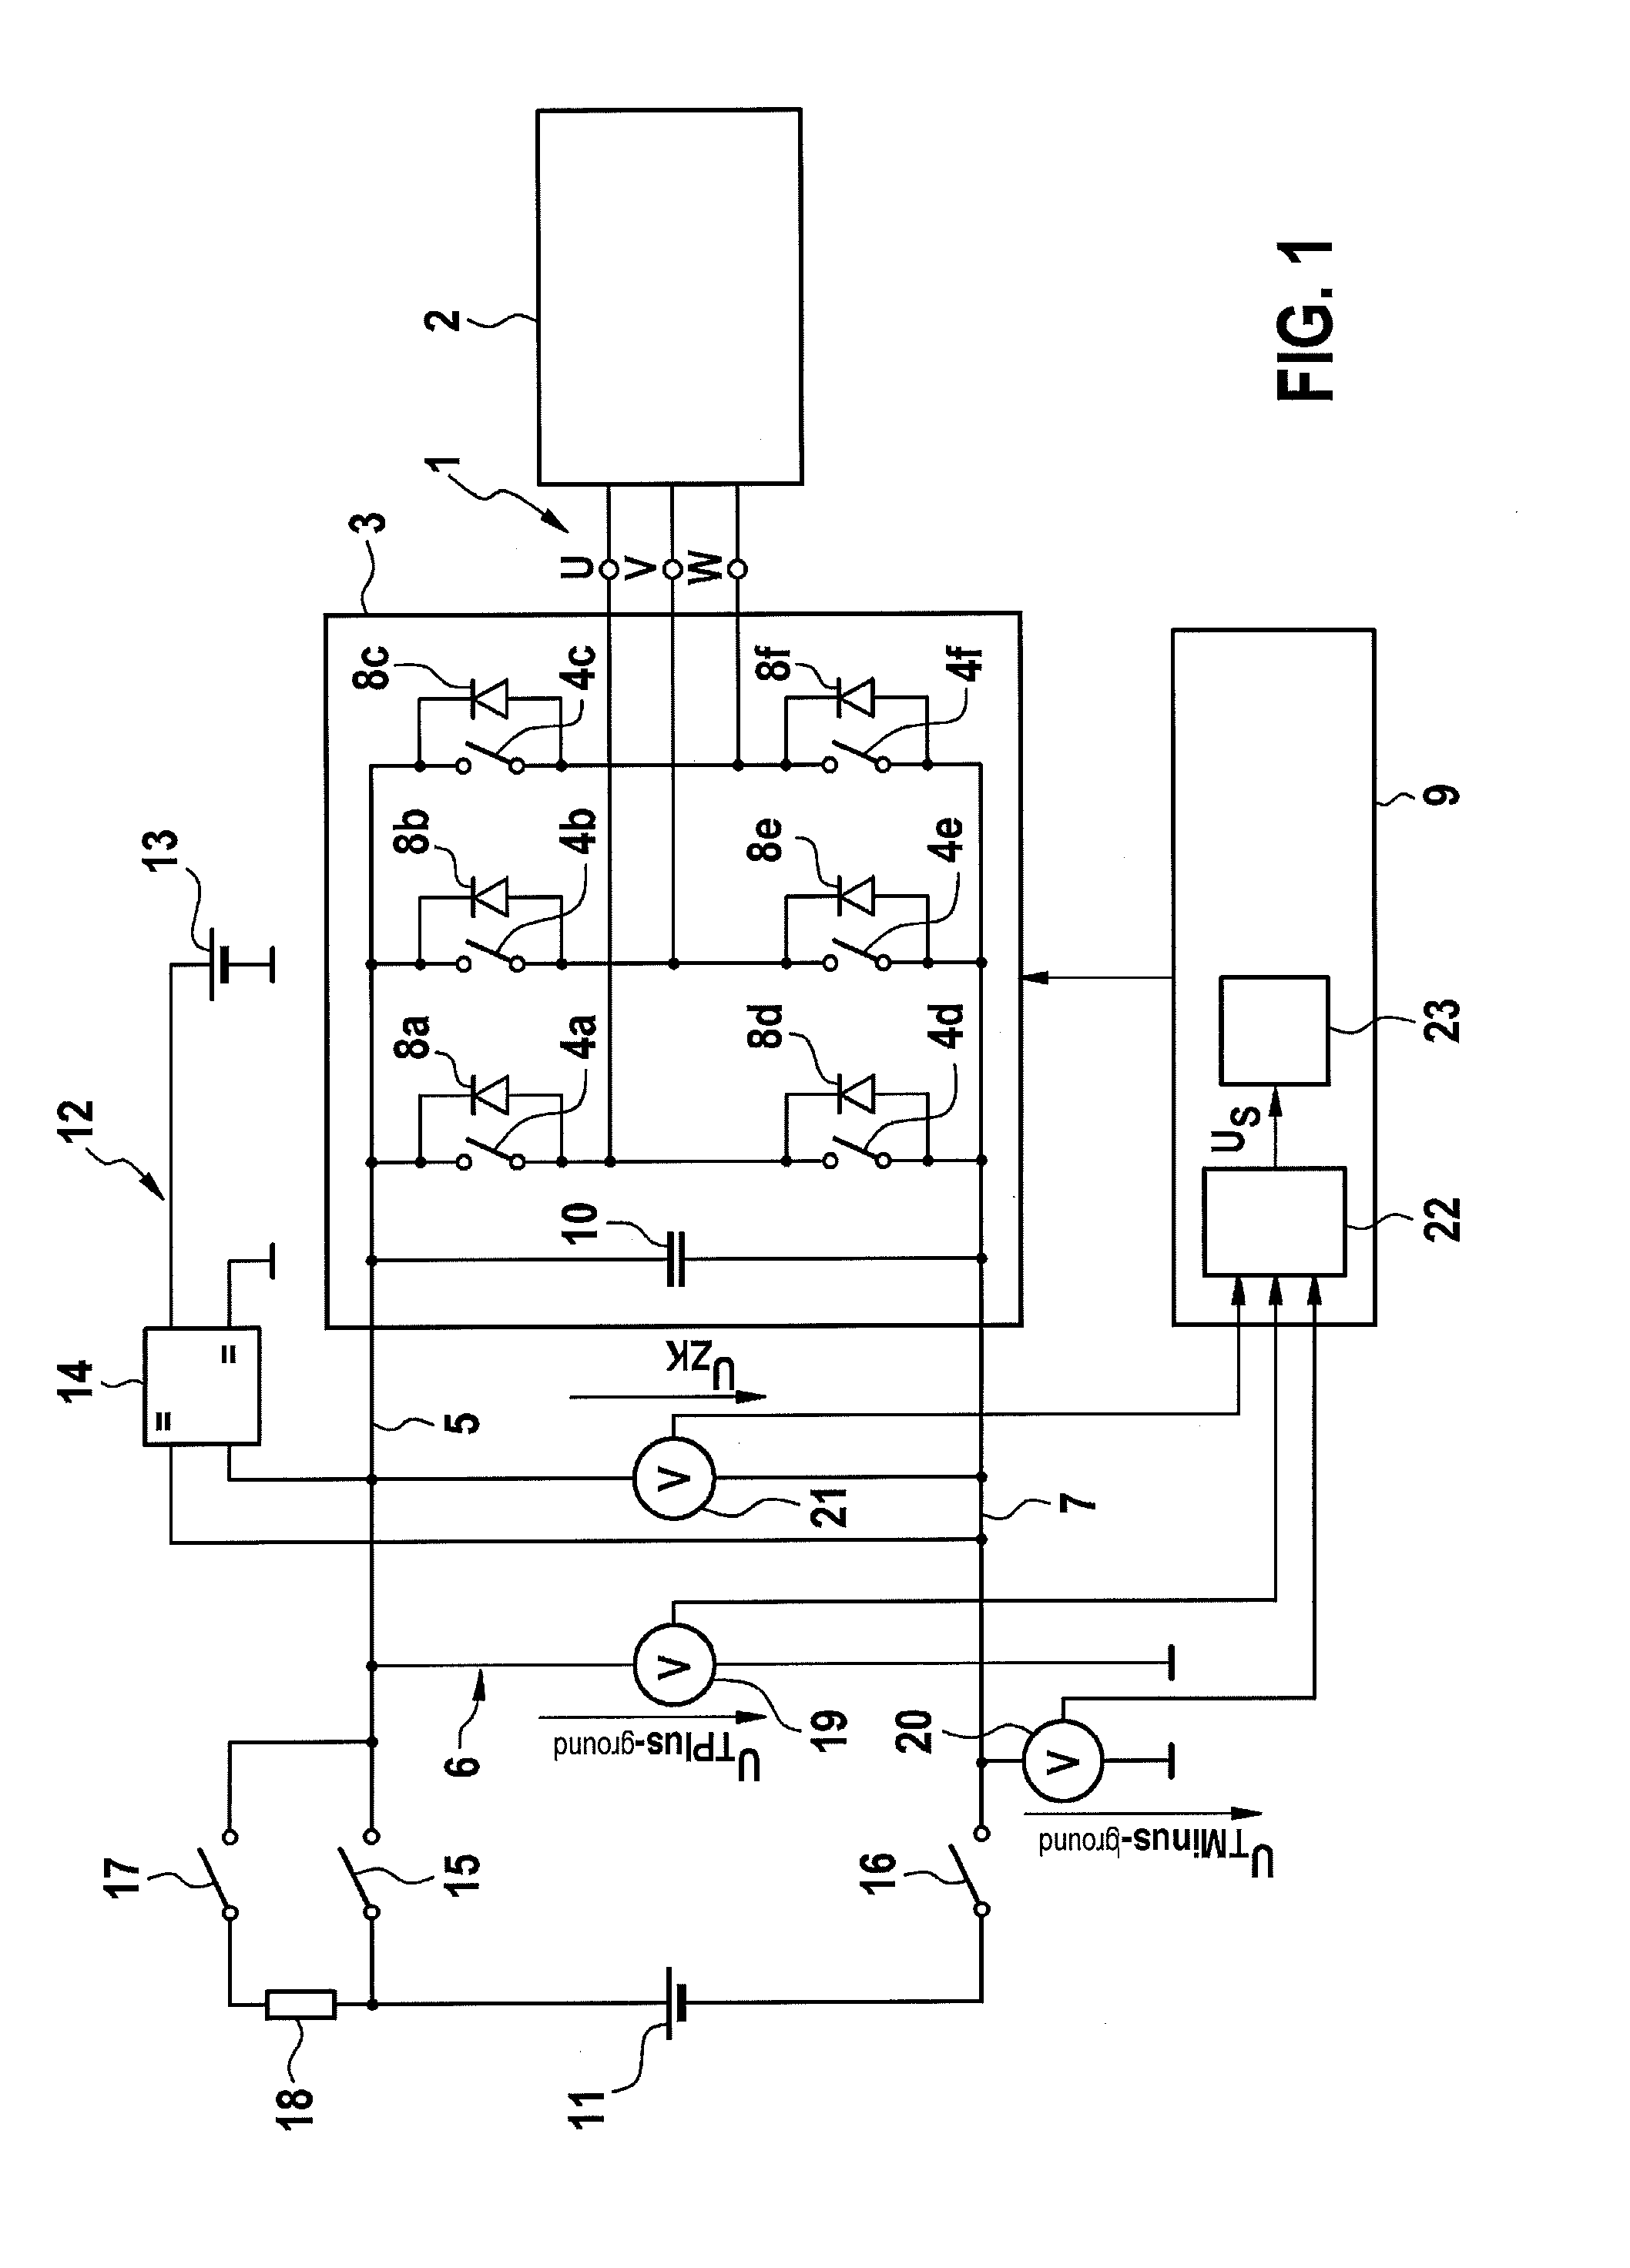 Method and device for monitoring the insulation resistance in an ungrounded electrical network